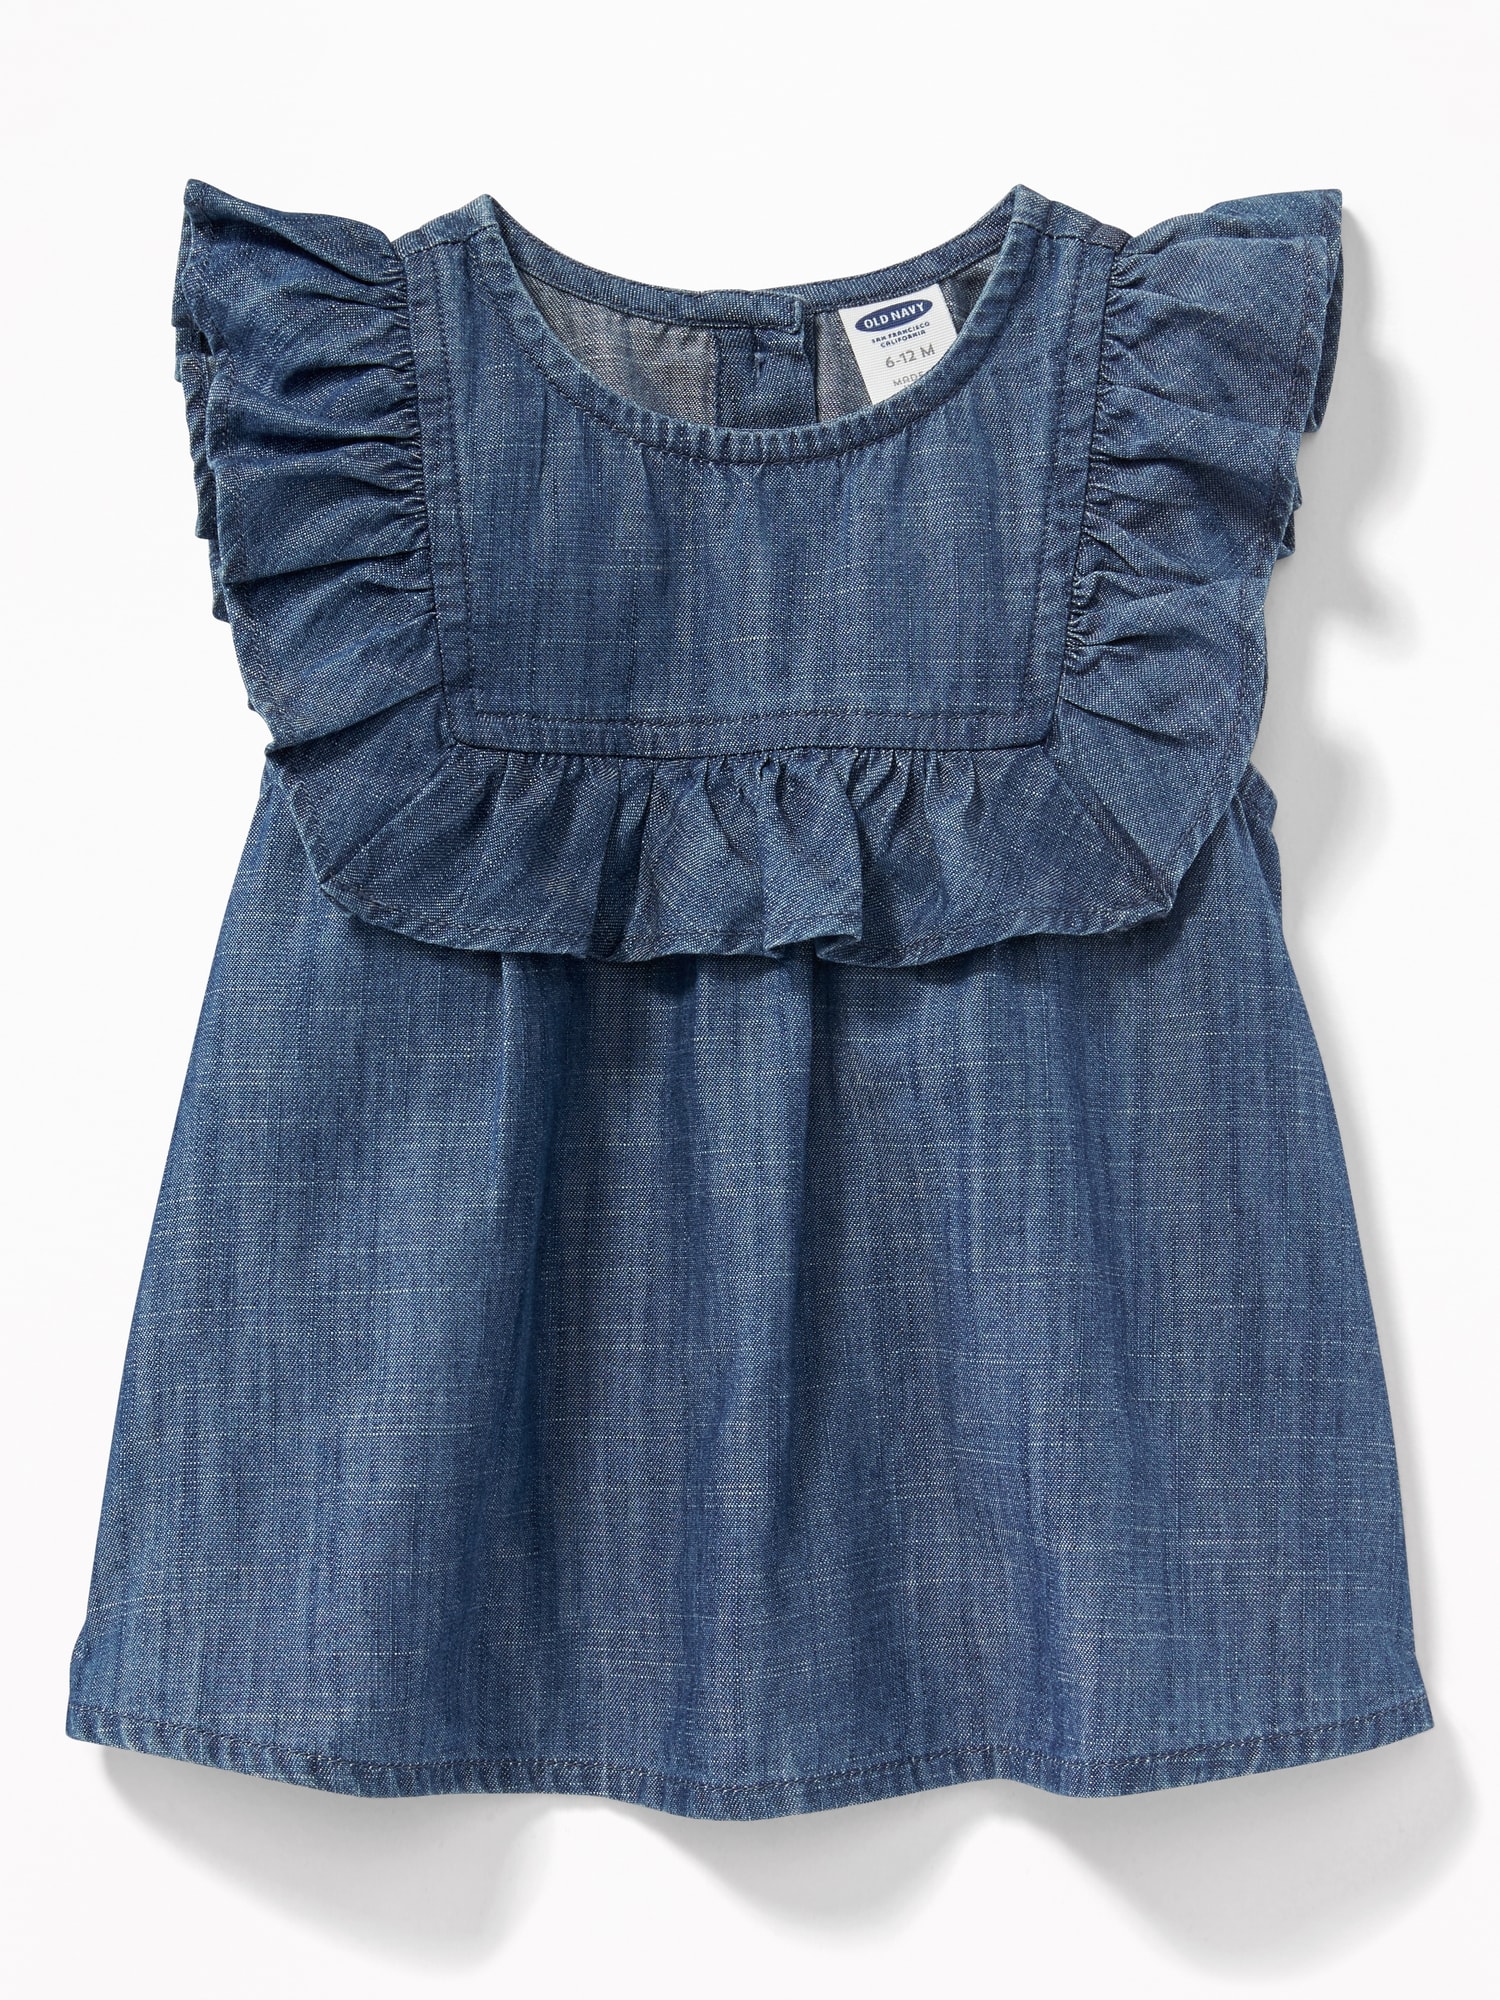 Ruffled Chambray Top for Baby | Old Navy